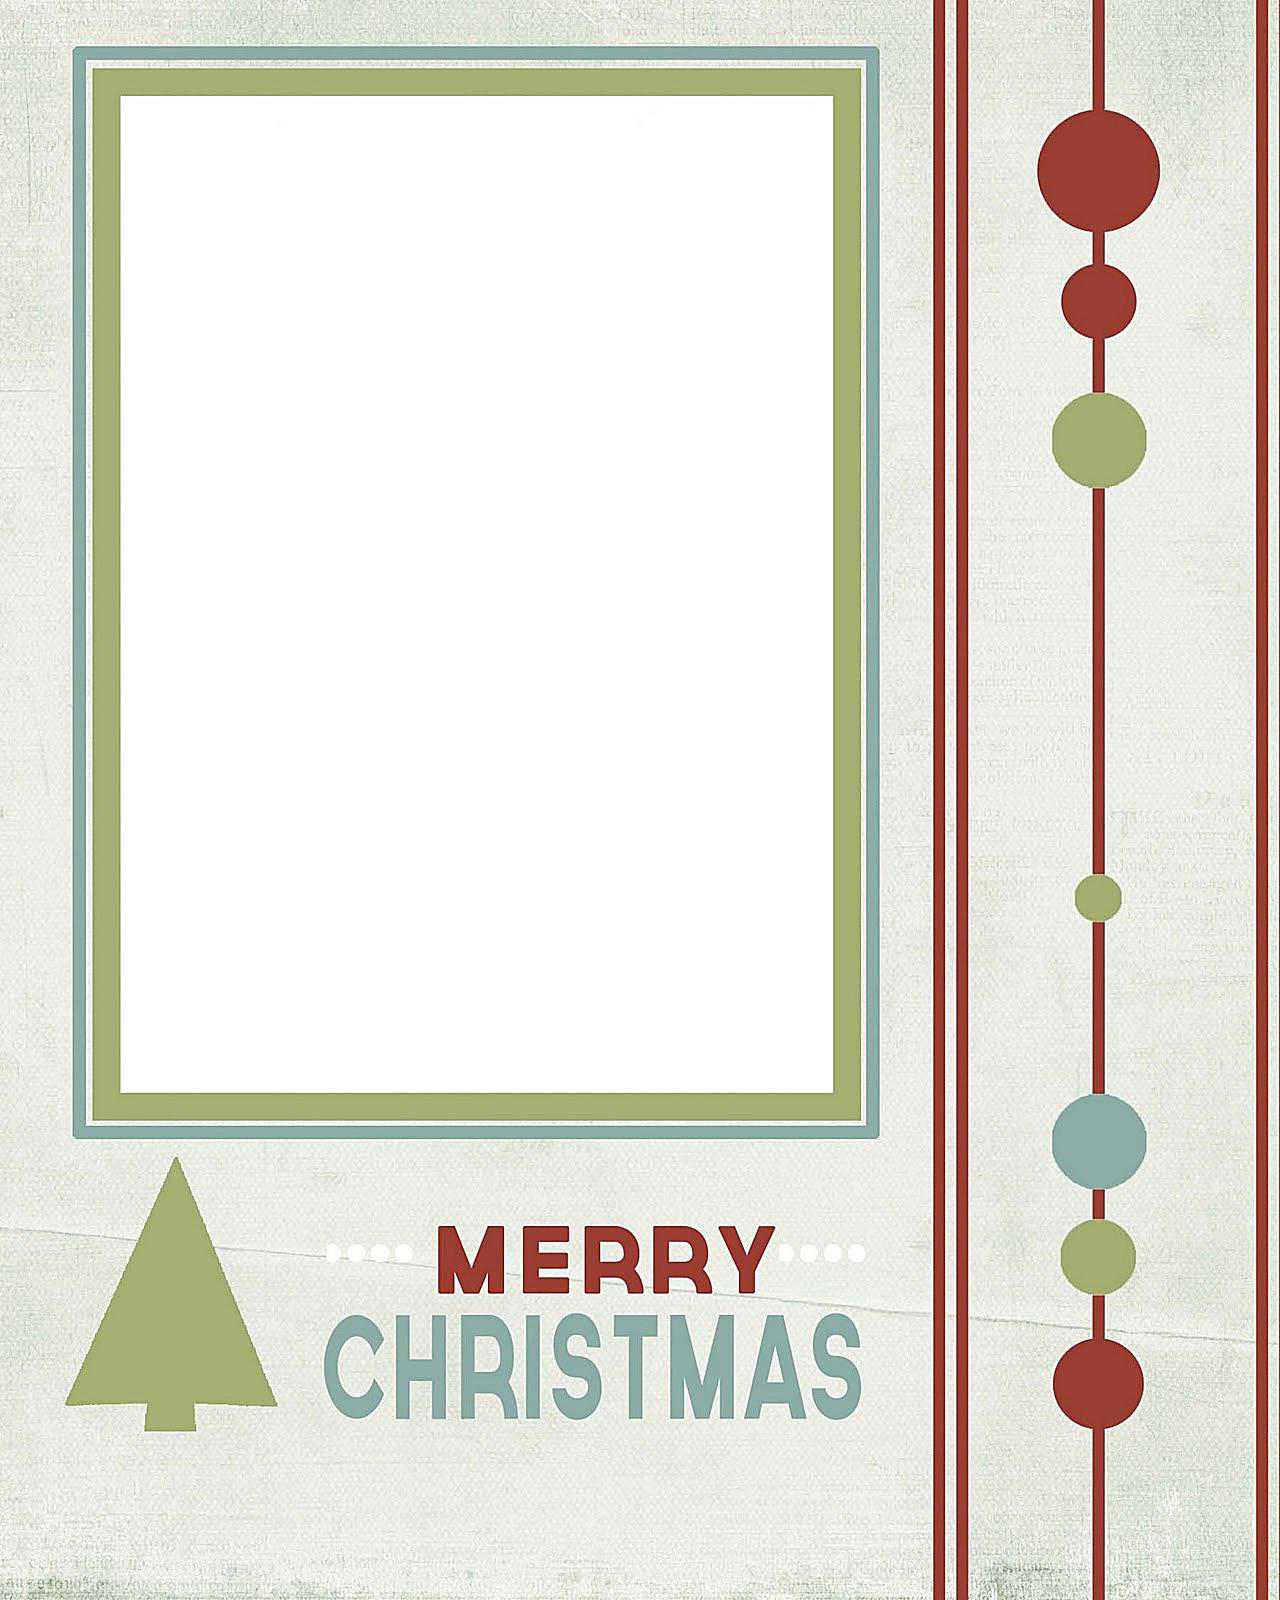 81 Creative Christmas Card Templates Images in Word by Christmas Card Templates Images